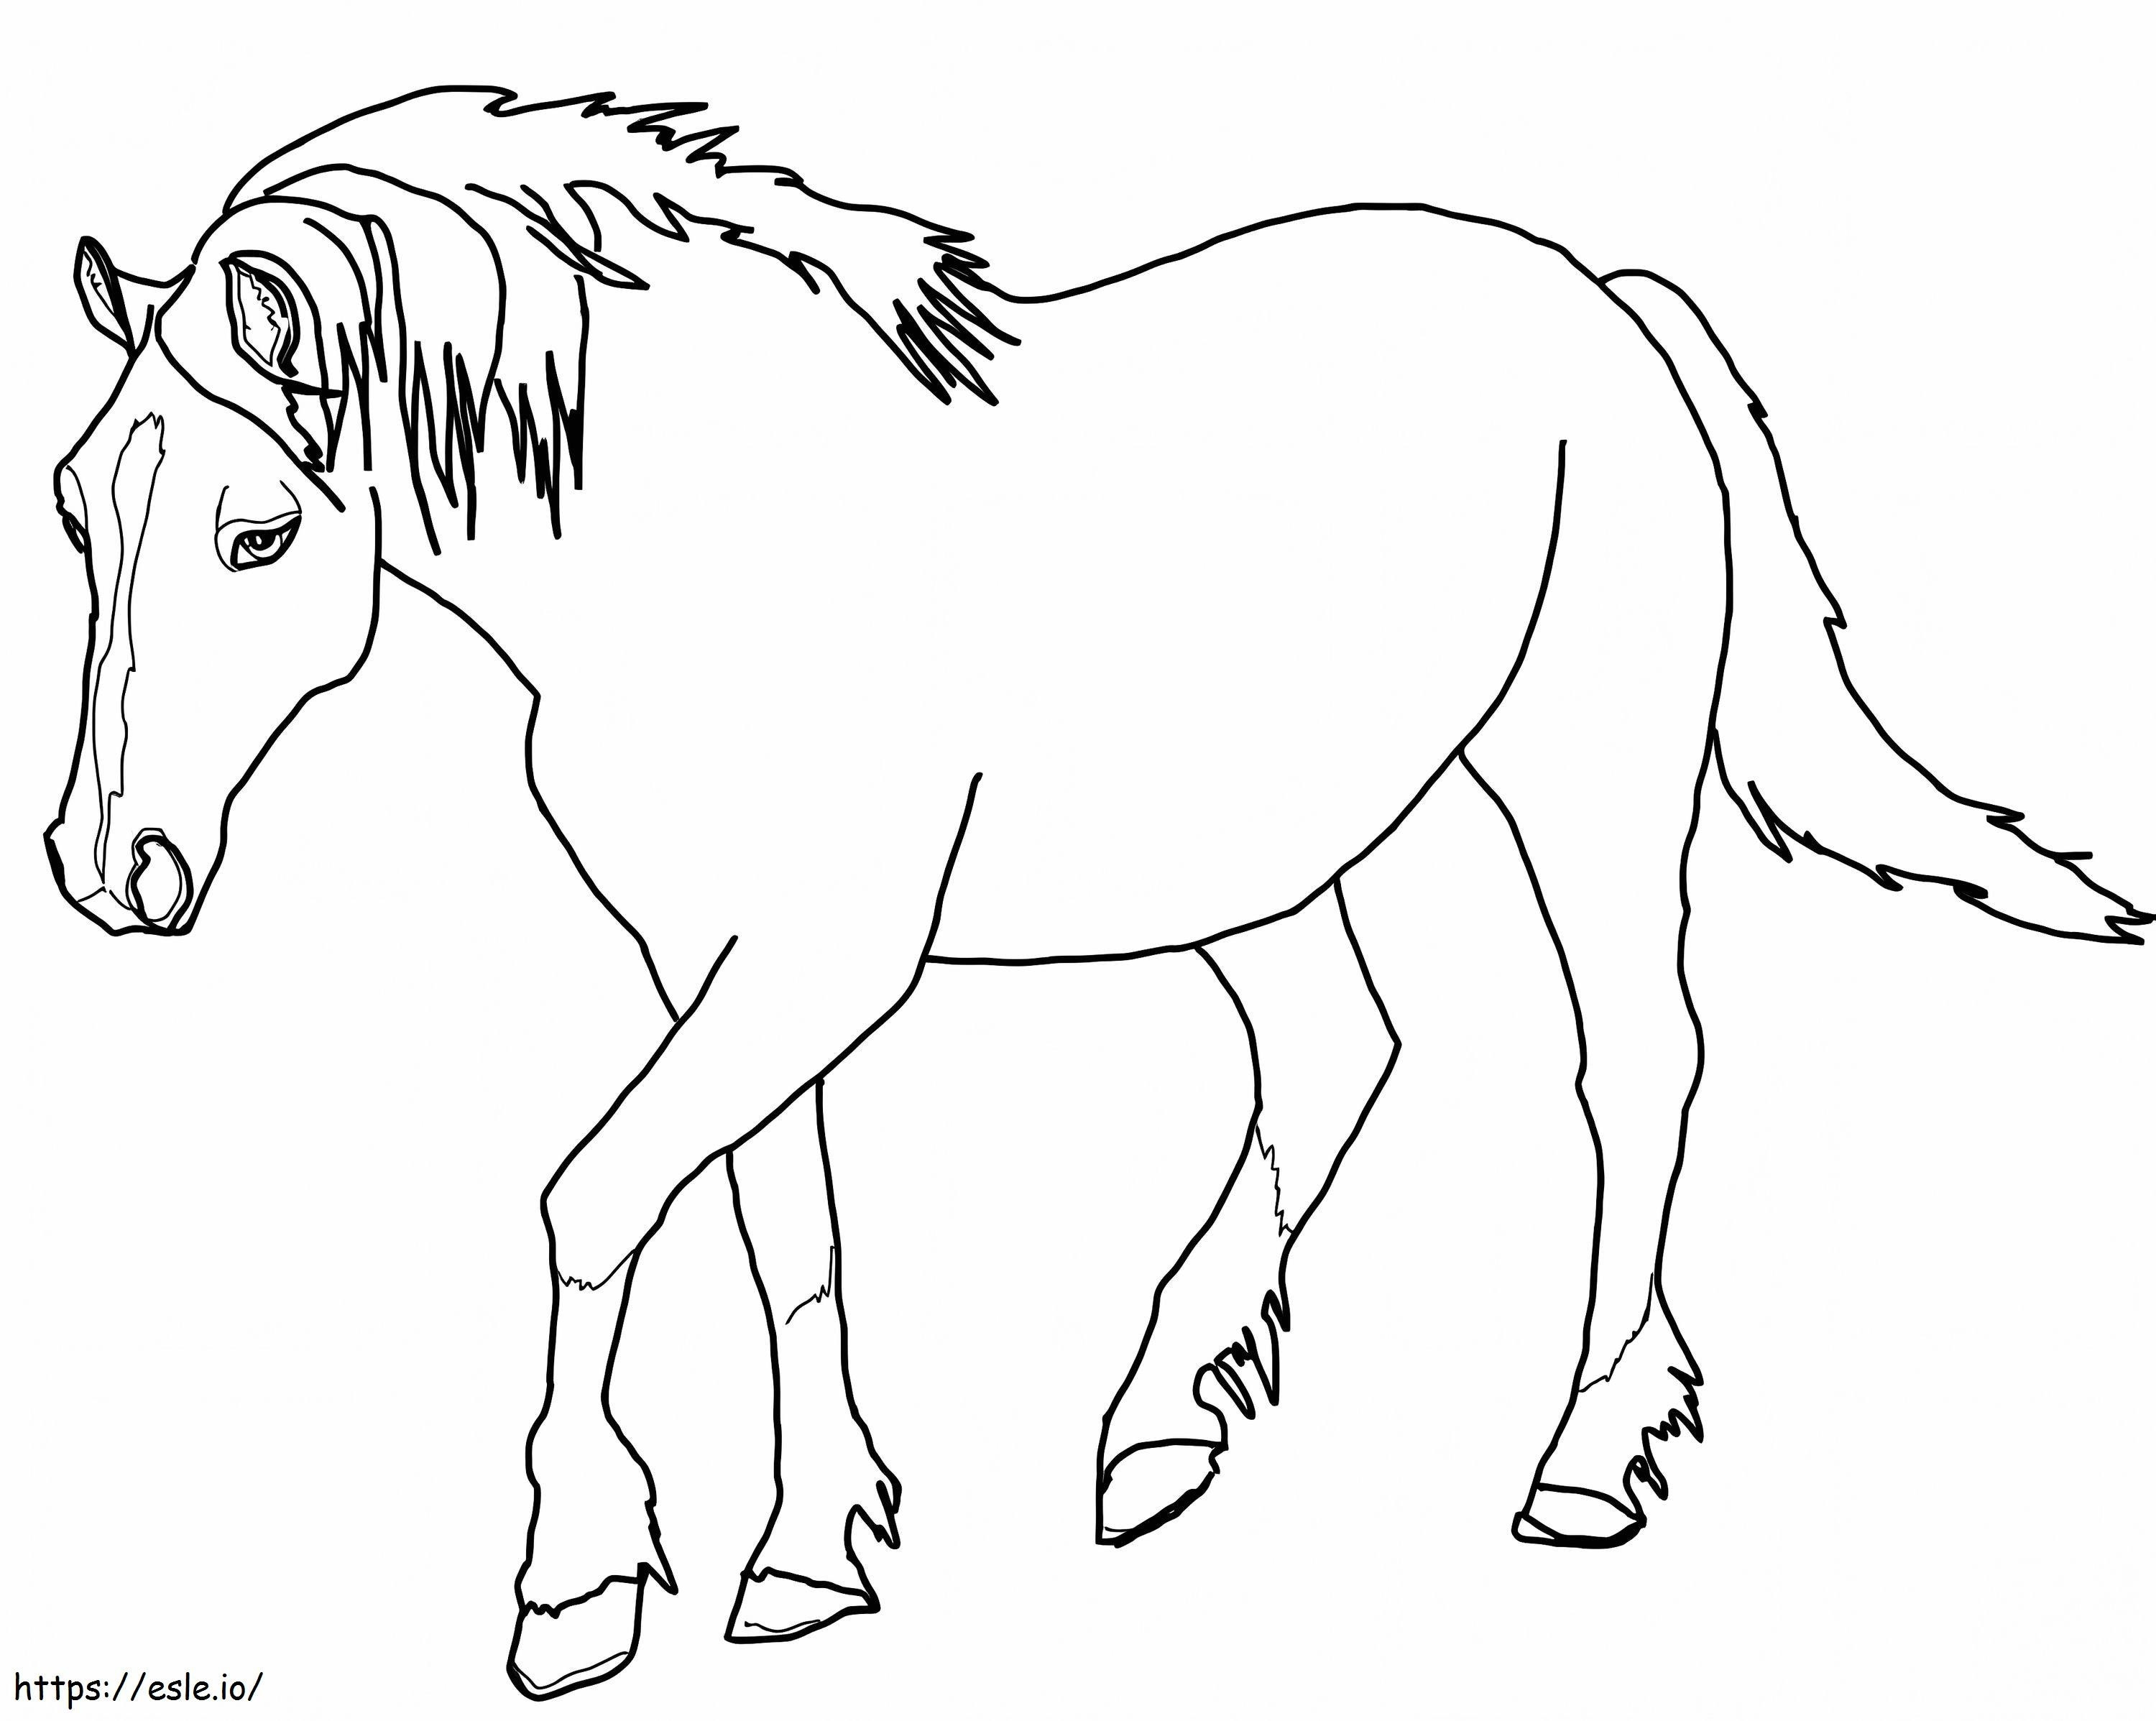 Palomino Welsh Horse coloring page